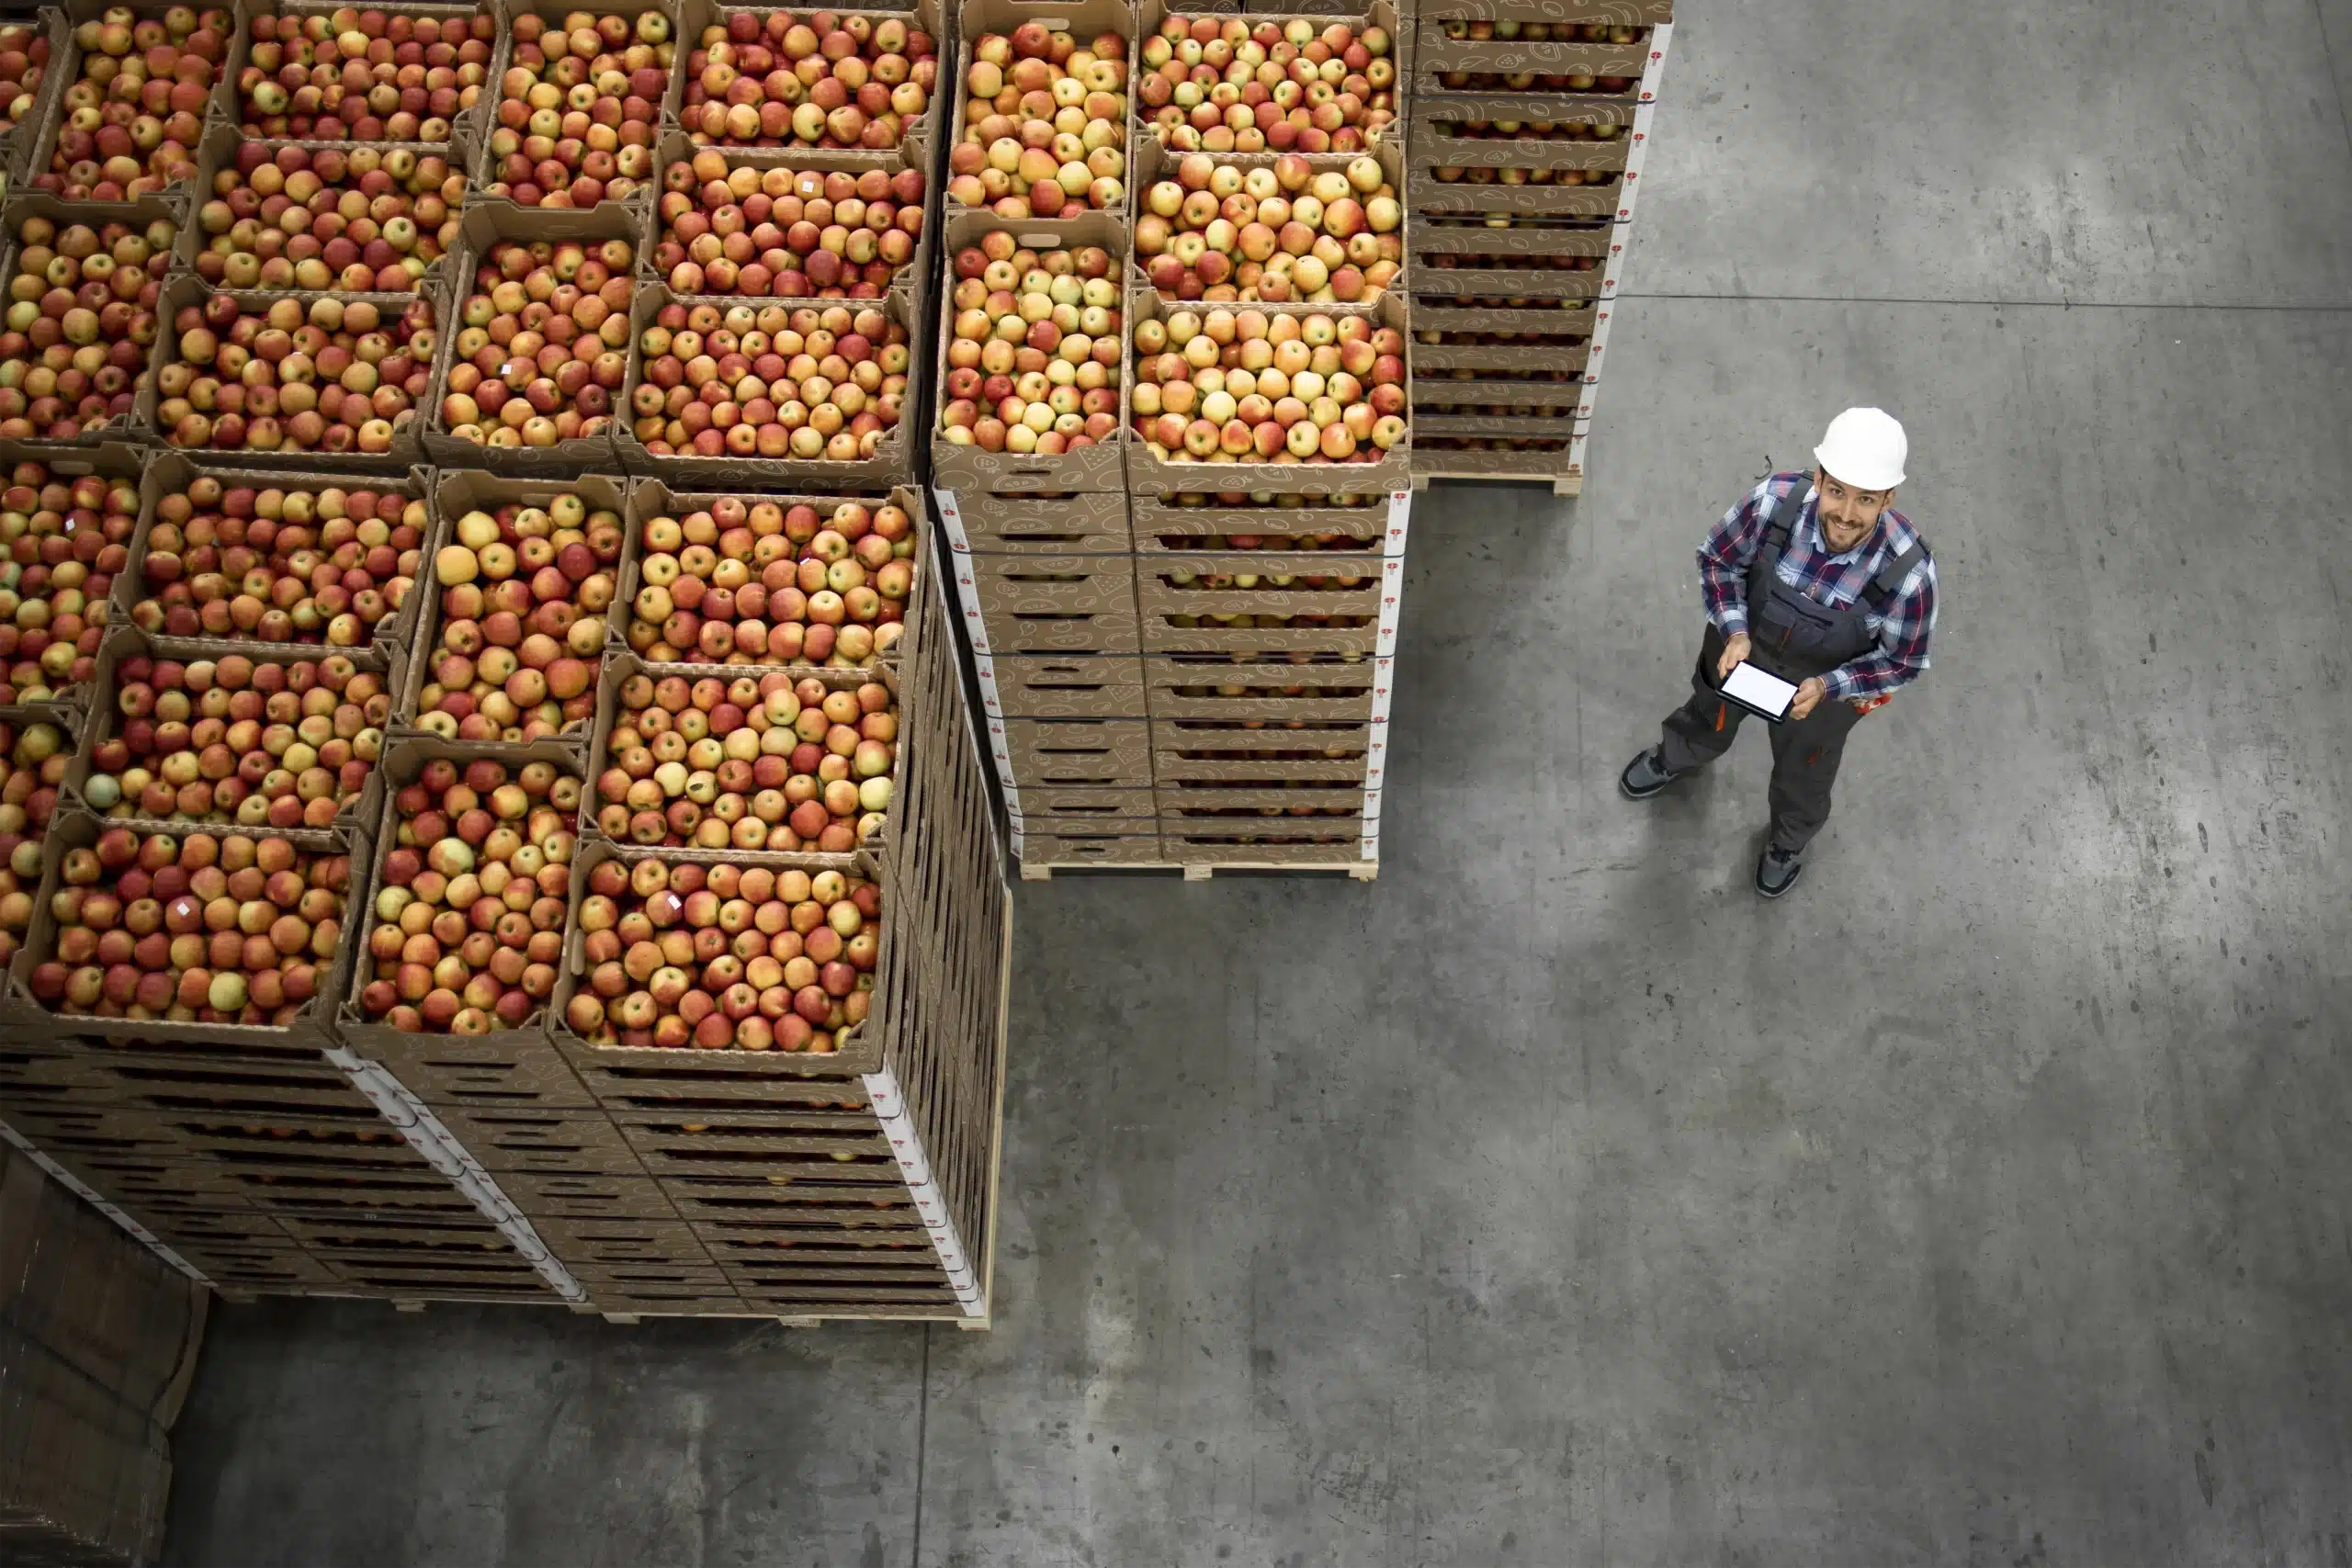 Man in white hard hat looking up while beside crates of apples